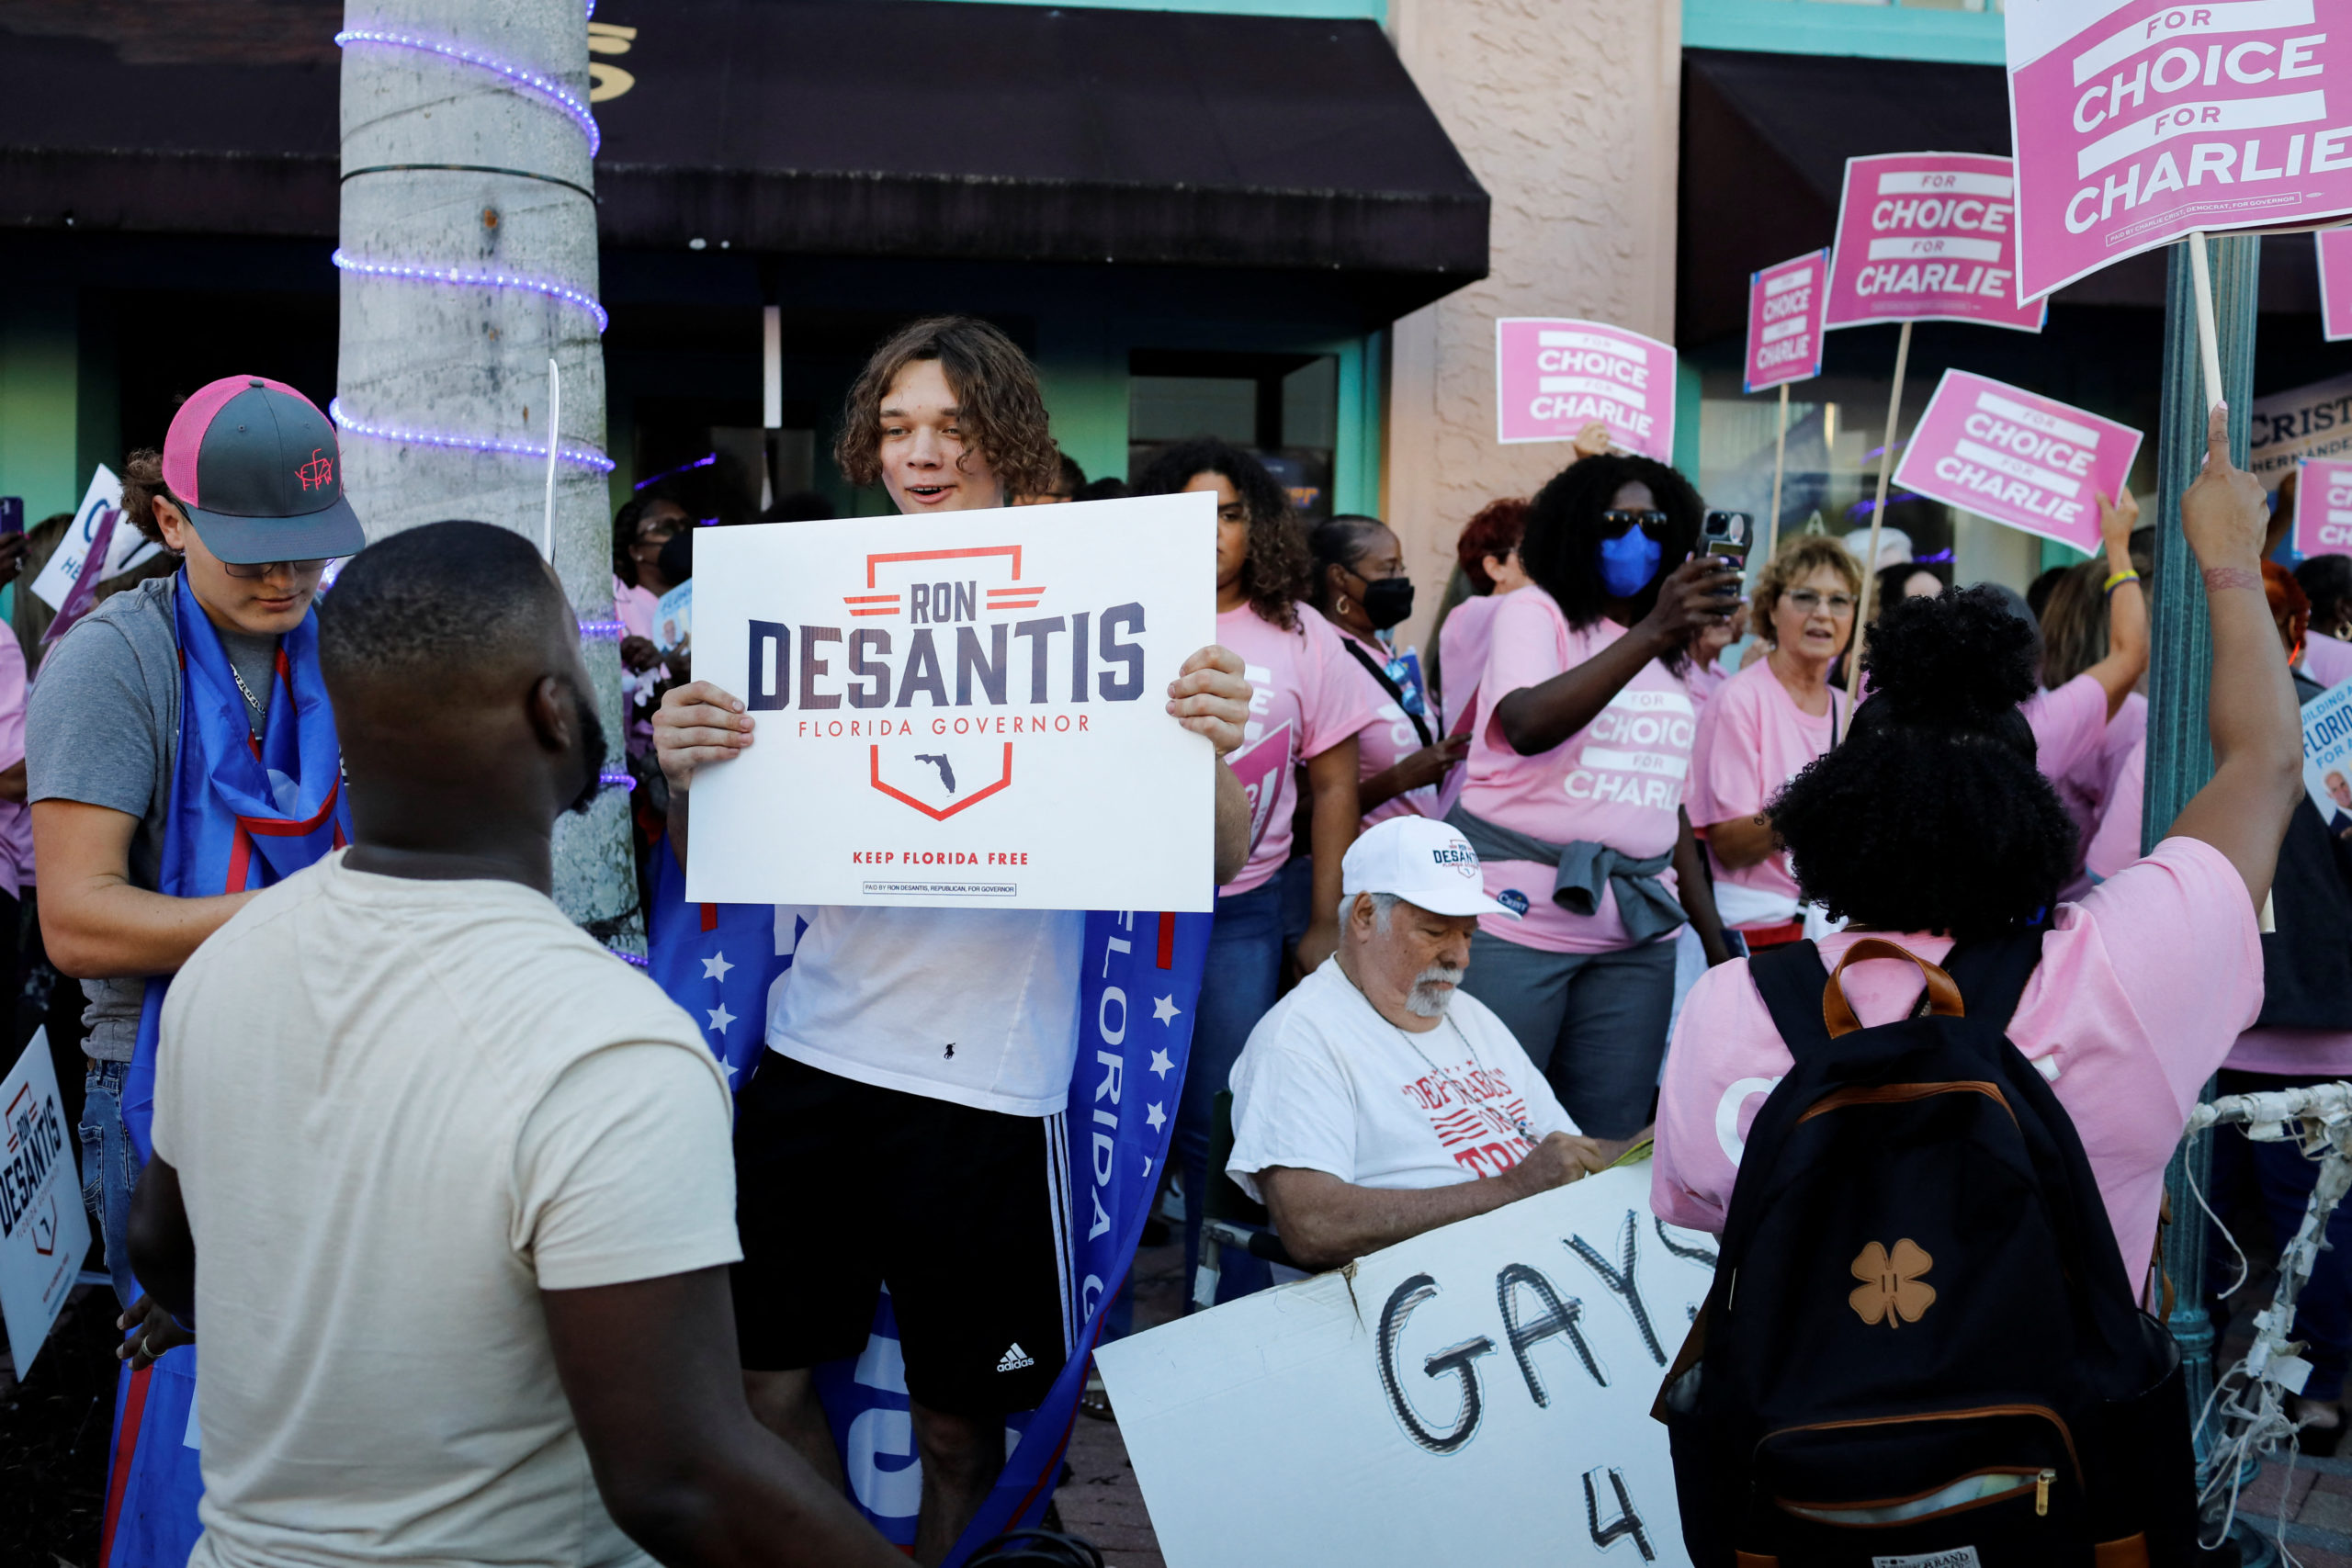 Supporters of Democratic challenger Charlie Crist and Florida Governor Ron DeSantis argue during a gathering outside the Sunrise Theatre before the candidates' debate ahead of midterm elections, in Fort Pierce, Florida, U.S., October 24, 2022. REUTERS/Marco Bello